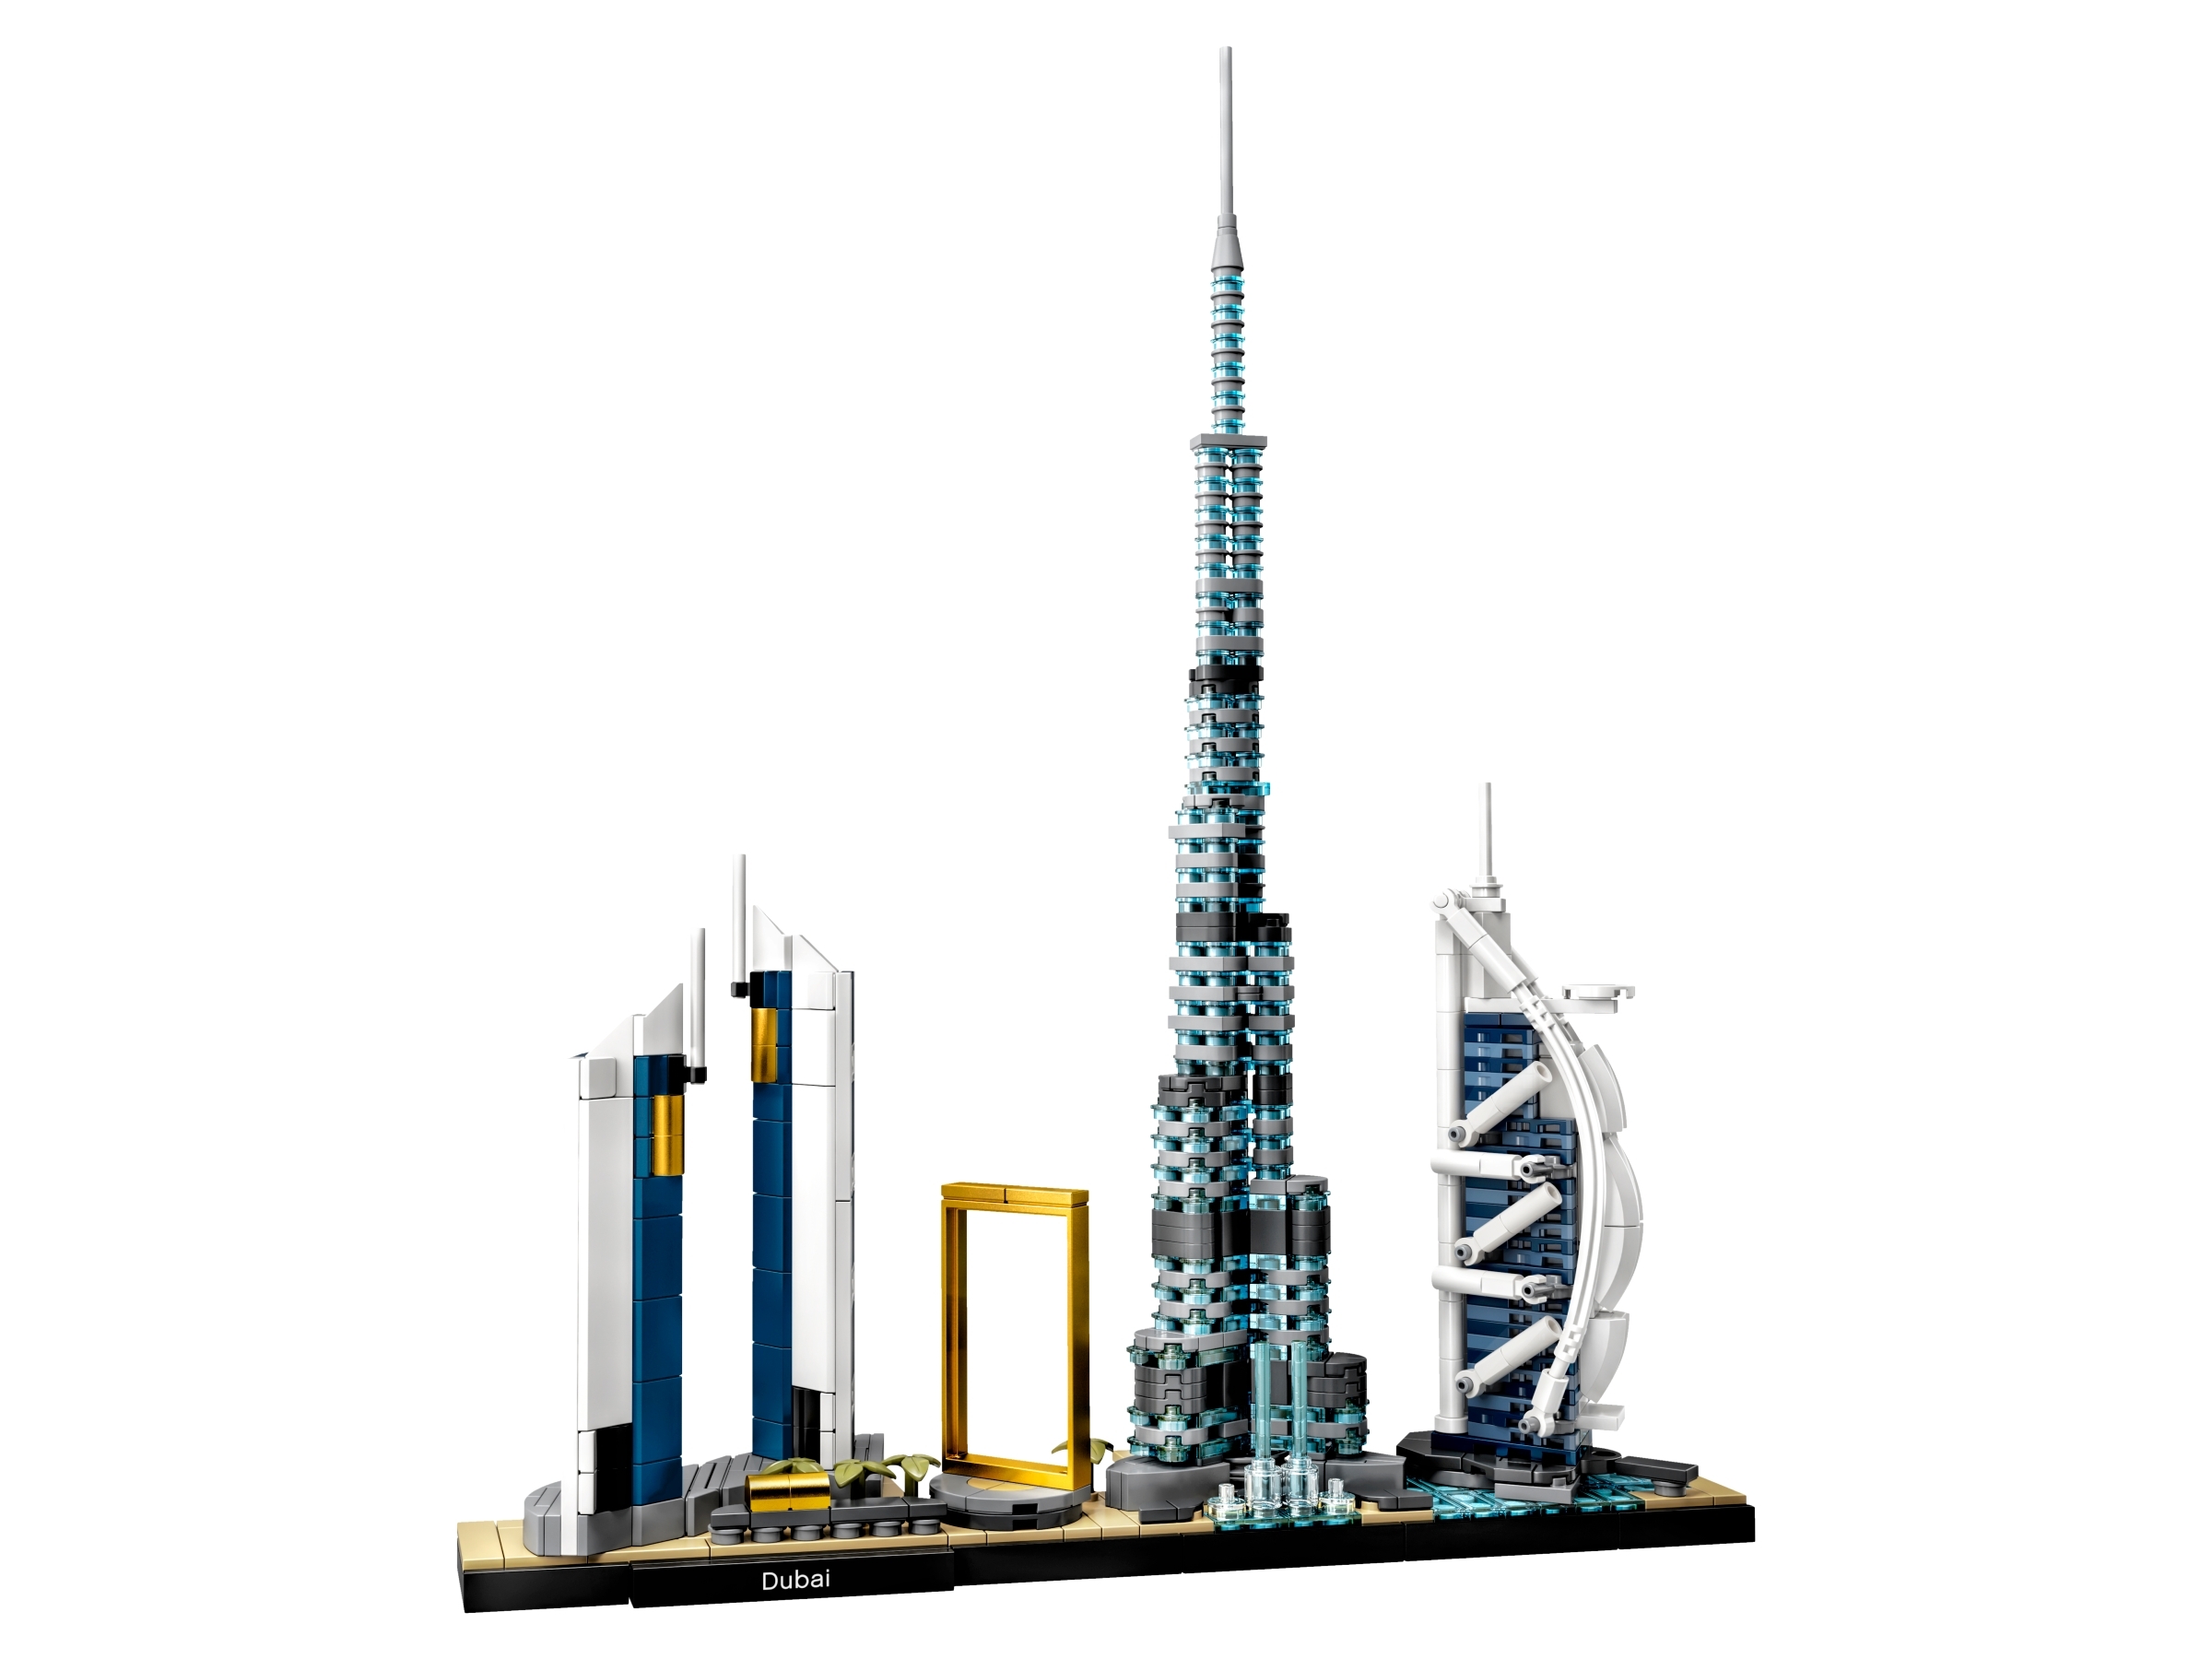 lego architecture offers